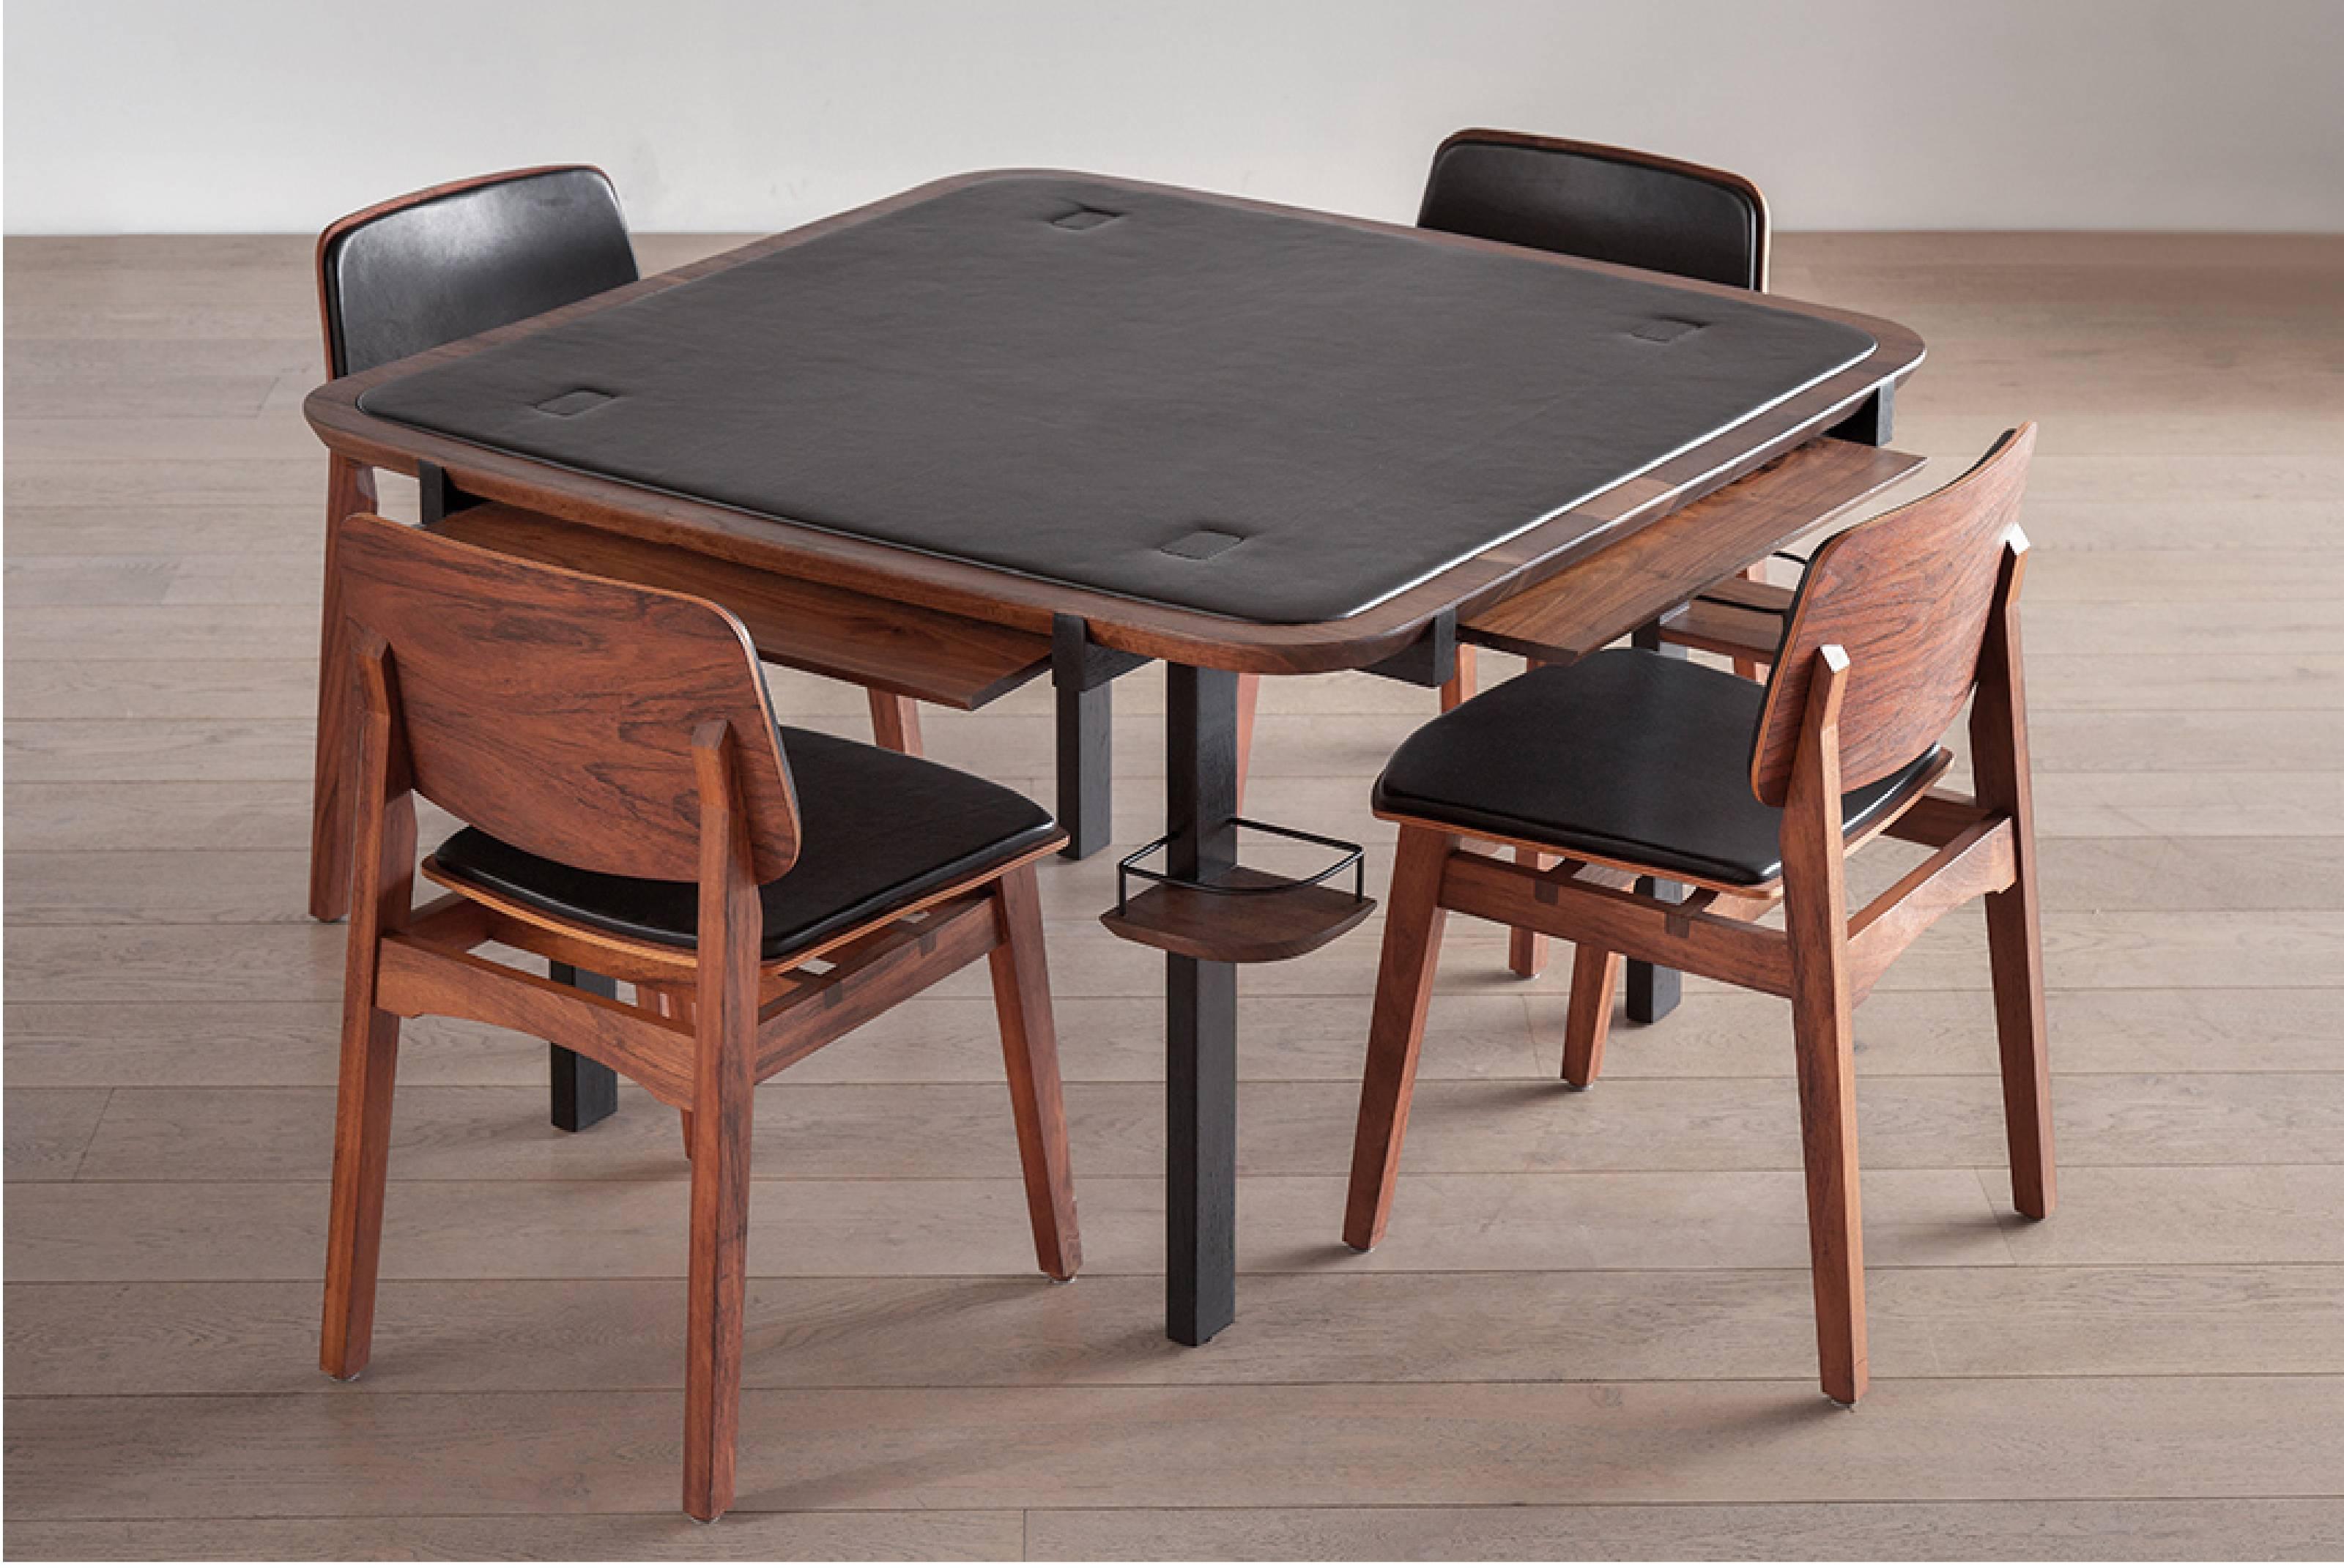 Purpose built for gaming, the Newton Table offers the well-worn character of traditional Mexican furnishings. The tabletop, inset with leather, allows for smooth dealing and flawless dice throwing. Four drawers tucked flush with the apron store